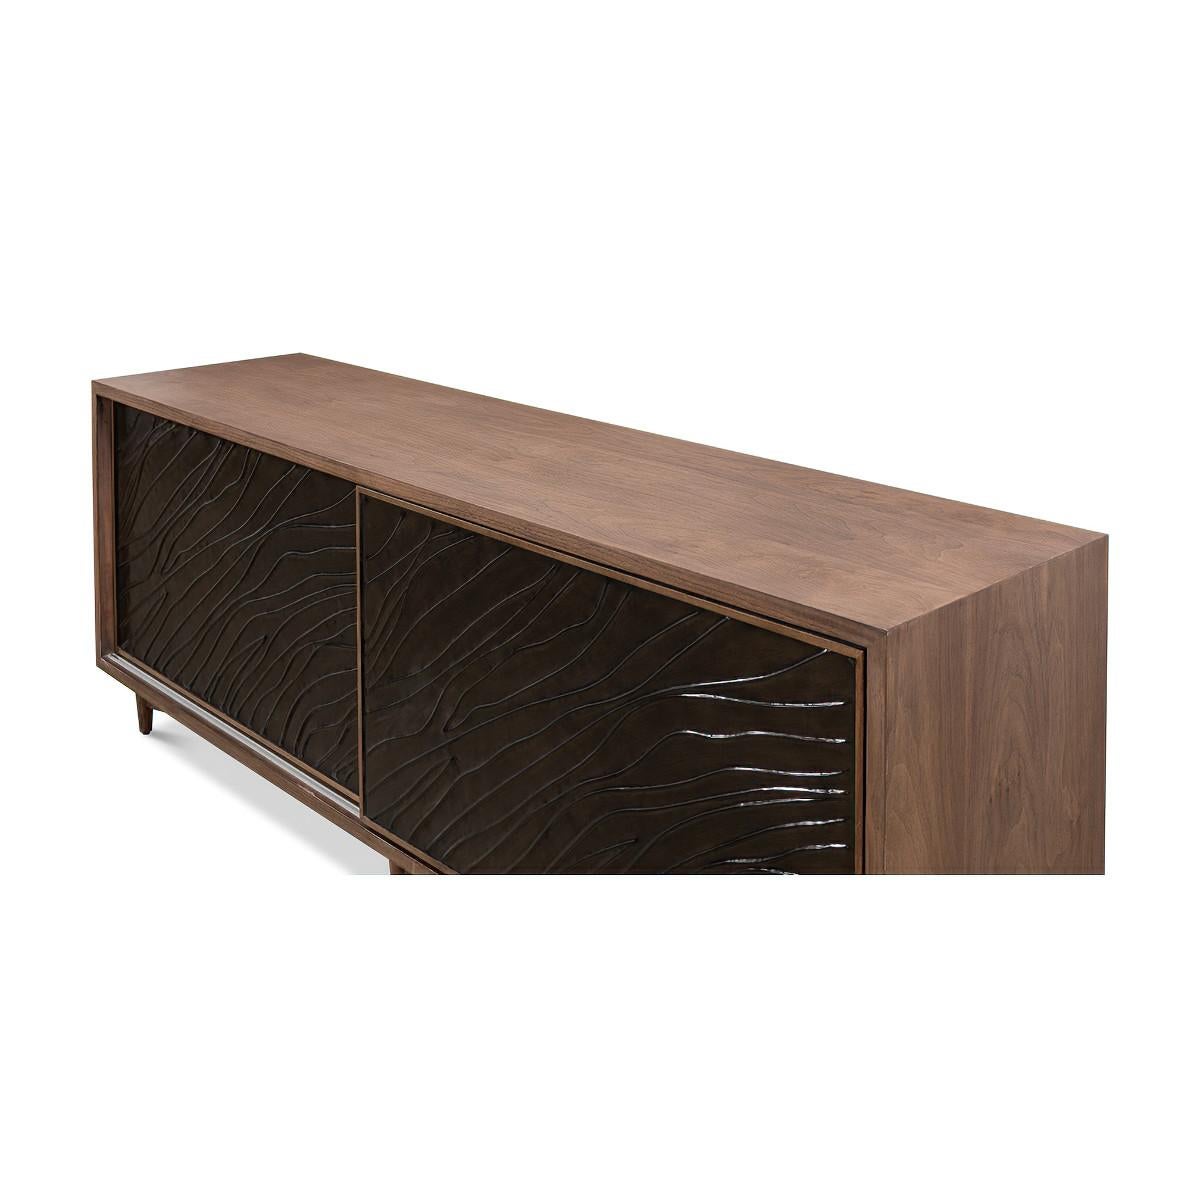 Contemporary Mid-Century Modern Media Storage Cabinet For Sale